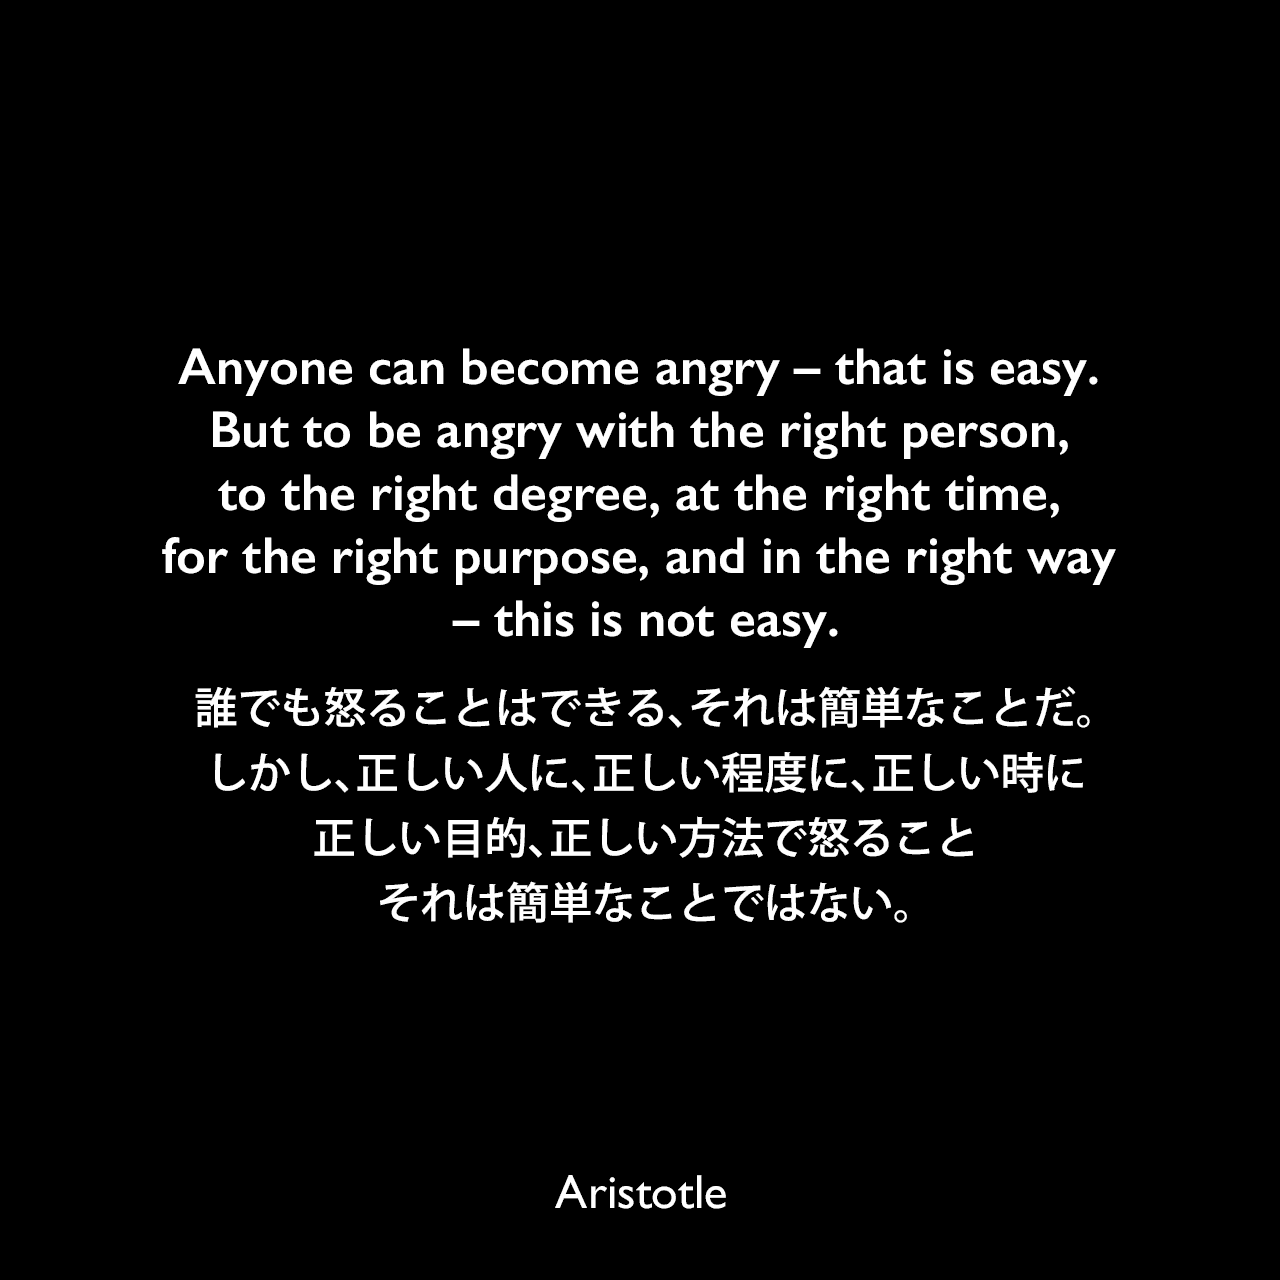 Anyone can become angry – that is easy. But to be angry with the right person, to the right degree, at the right time, for the right purpose, and in the right way – this is not easy.誰でも怒ることはできる、それは簡単なことだ。しかし、正しい人に、正しい程度に、正しい時に、正しい目的、正しい方法で怒ること、それは簡単なことではない。- Edith M. Leonardの本「Edith M. Leonard」よりAristotle